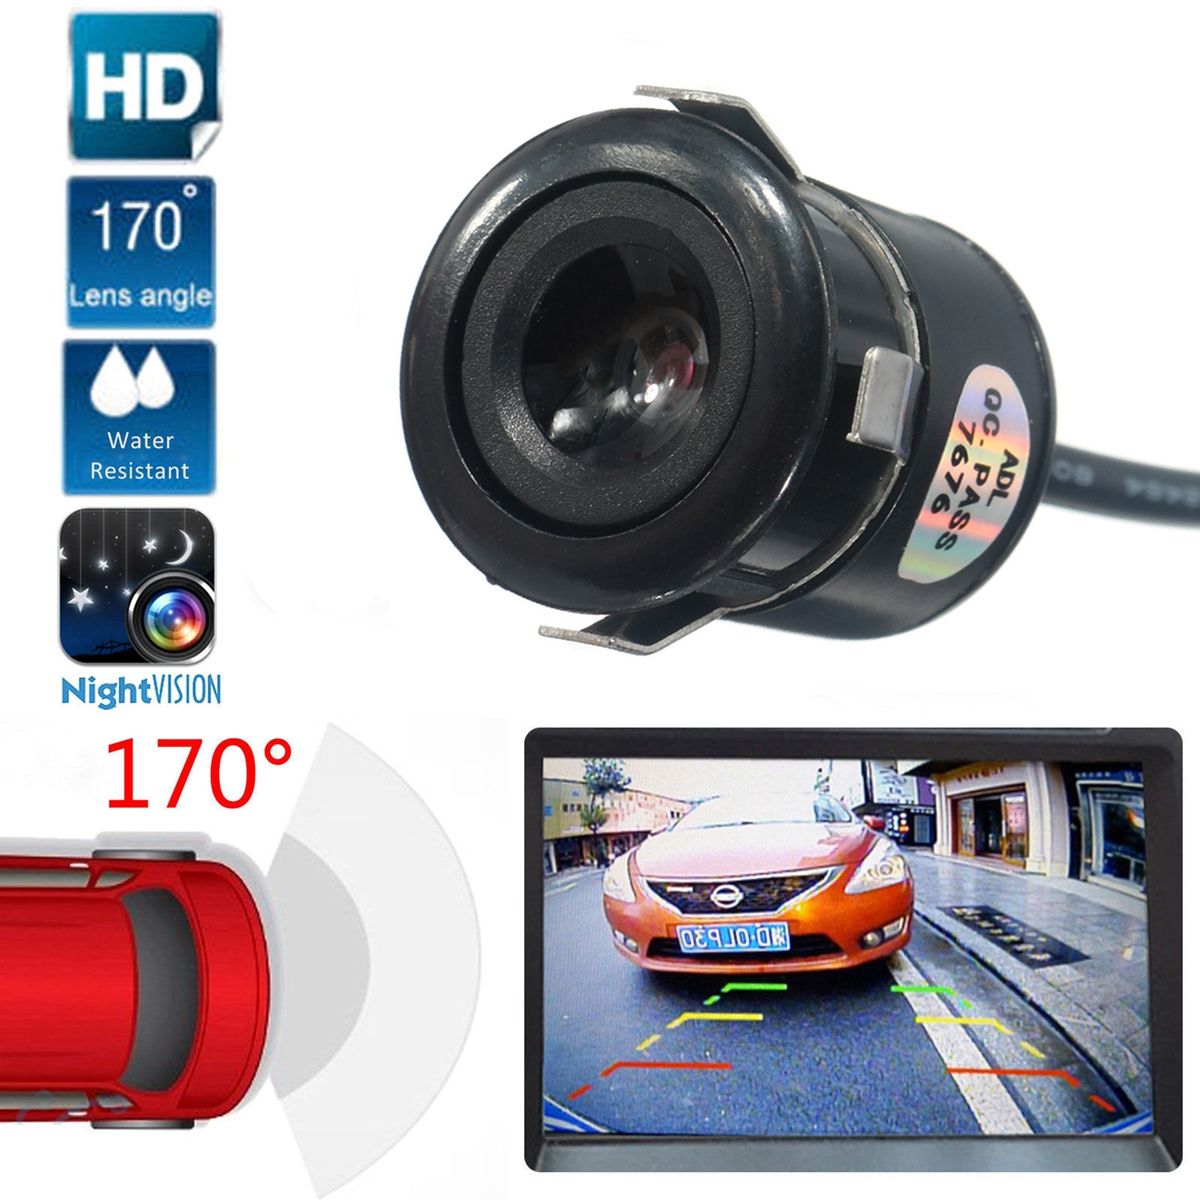 HD-170-CMOS-Cars-Rear-View-Waterproof-Reverse-Backup-Camera-Night-vision-with-Cable-1266106